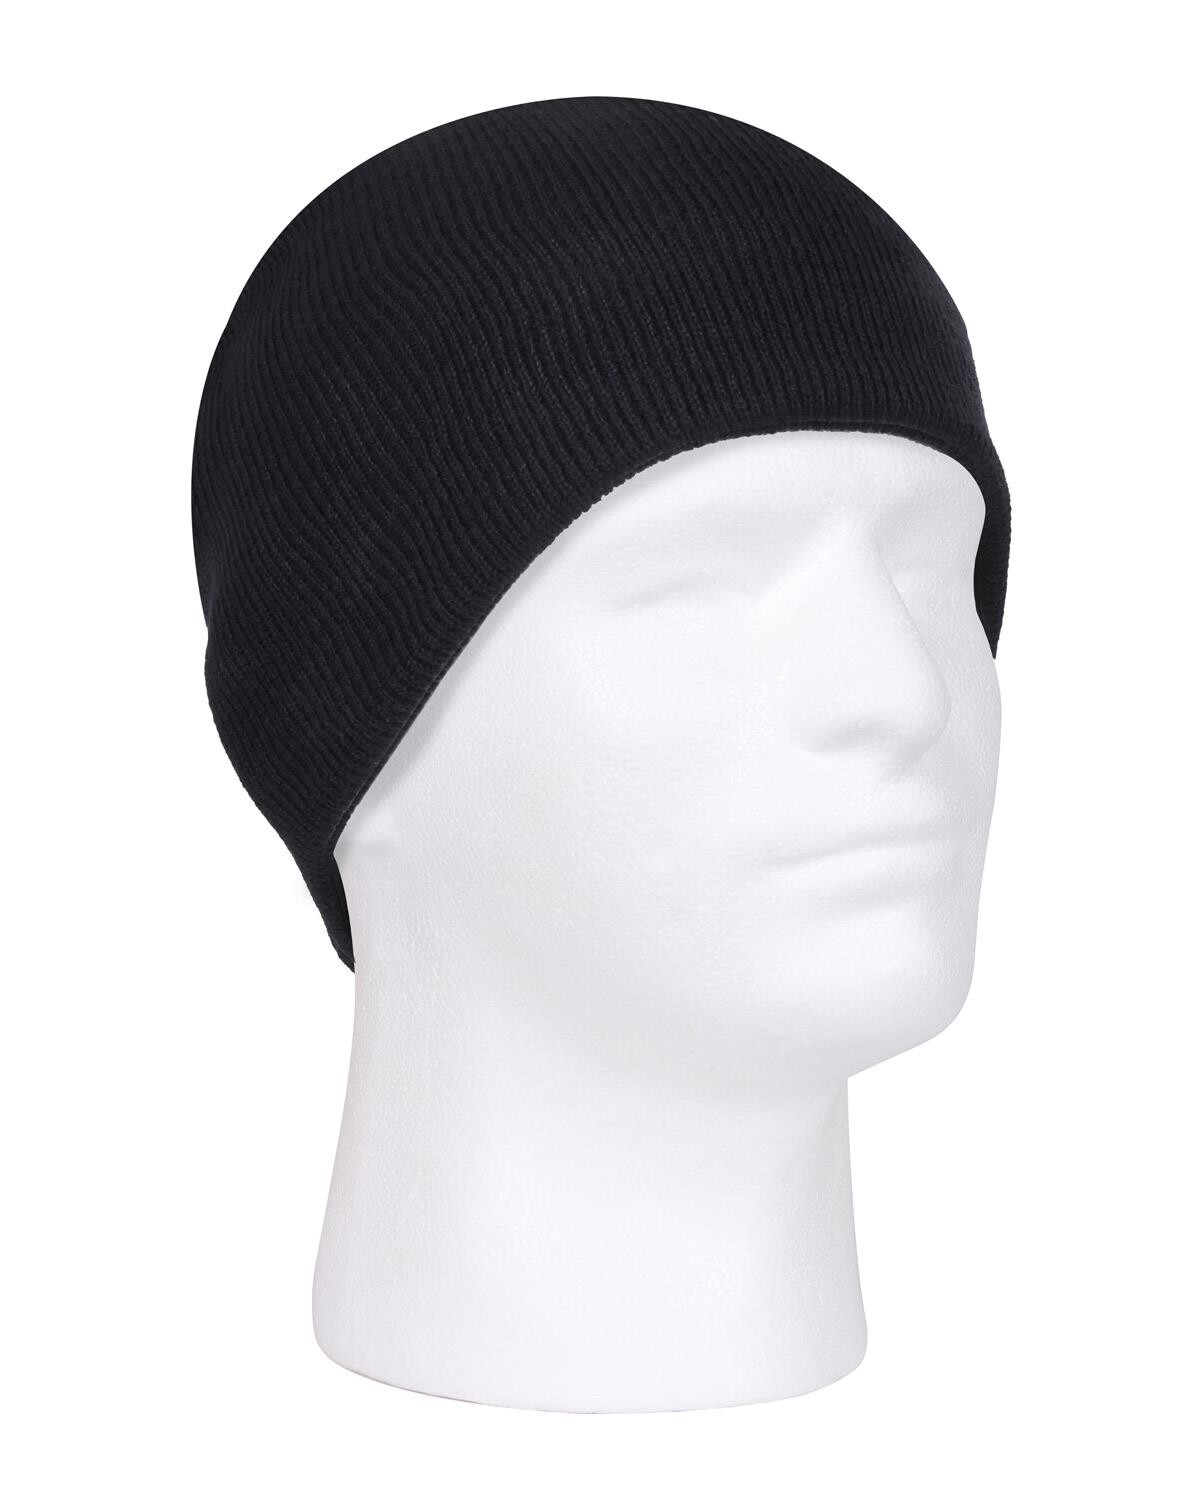 #2 - Rothco Beanie (Sort, One Size)